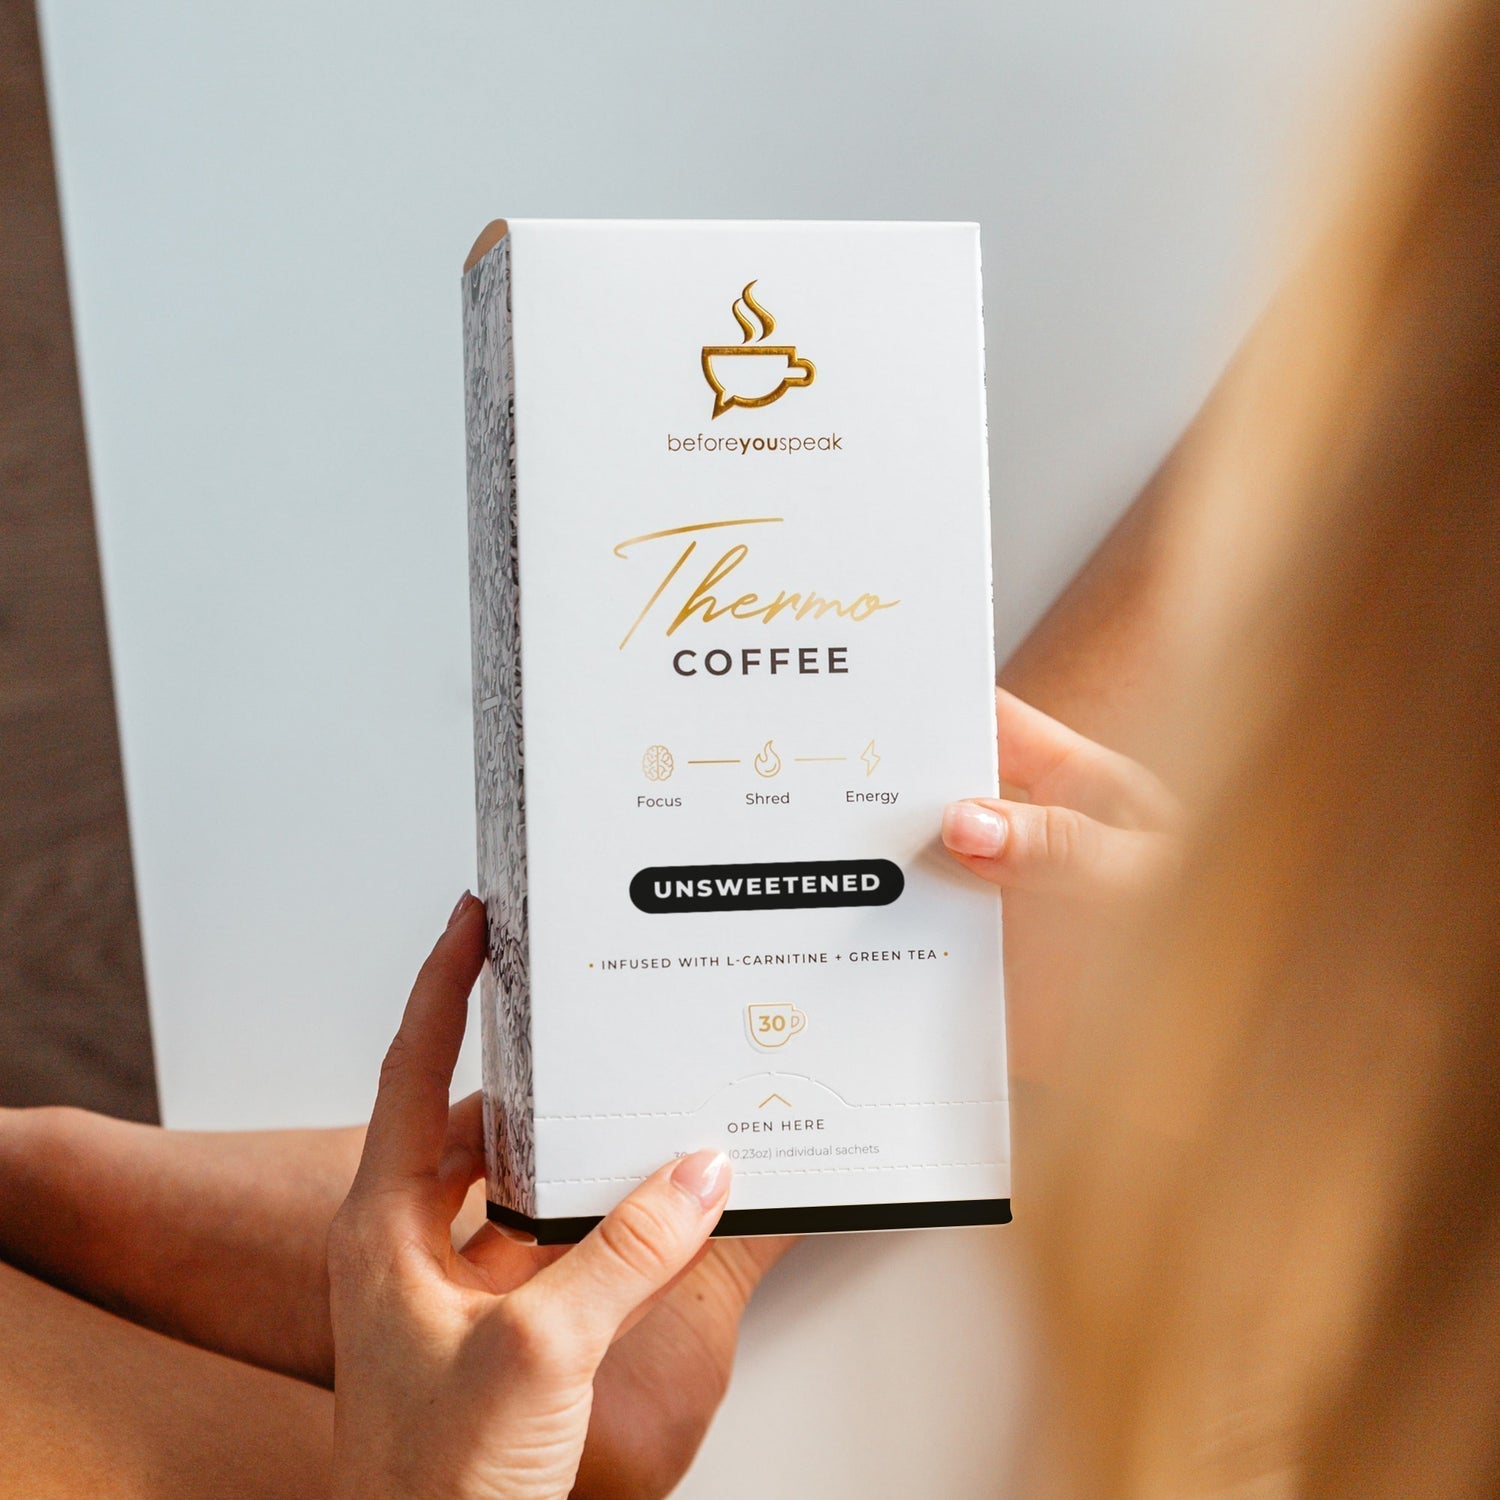 Thermo Coffee UNSWEETENED - Exquisite Laser Clinic